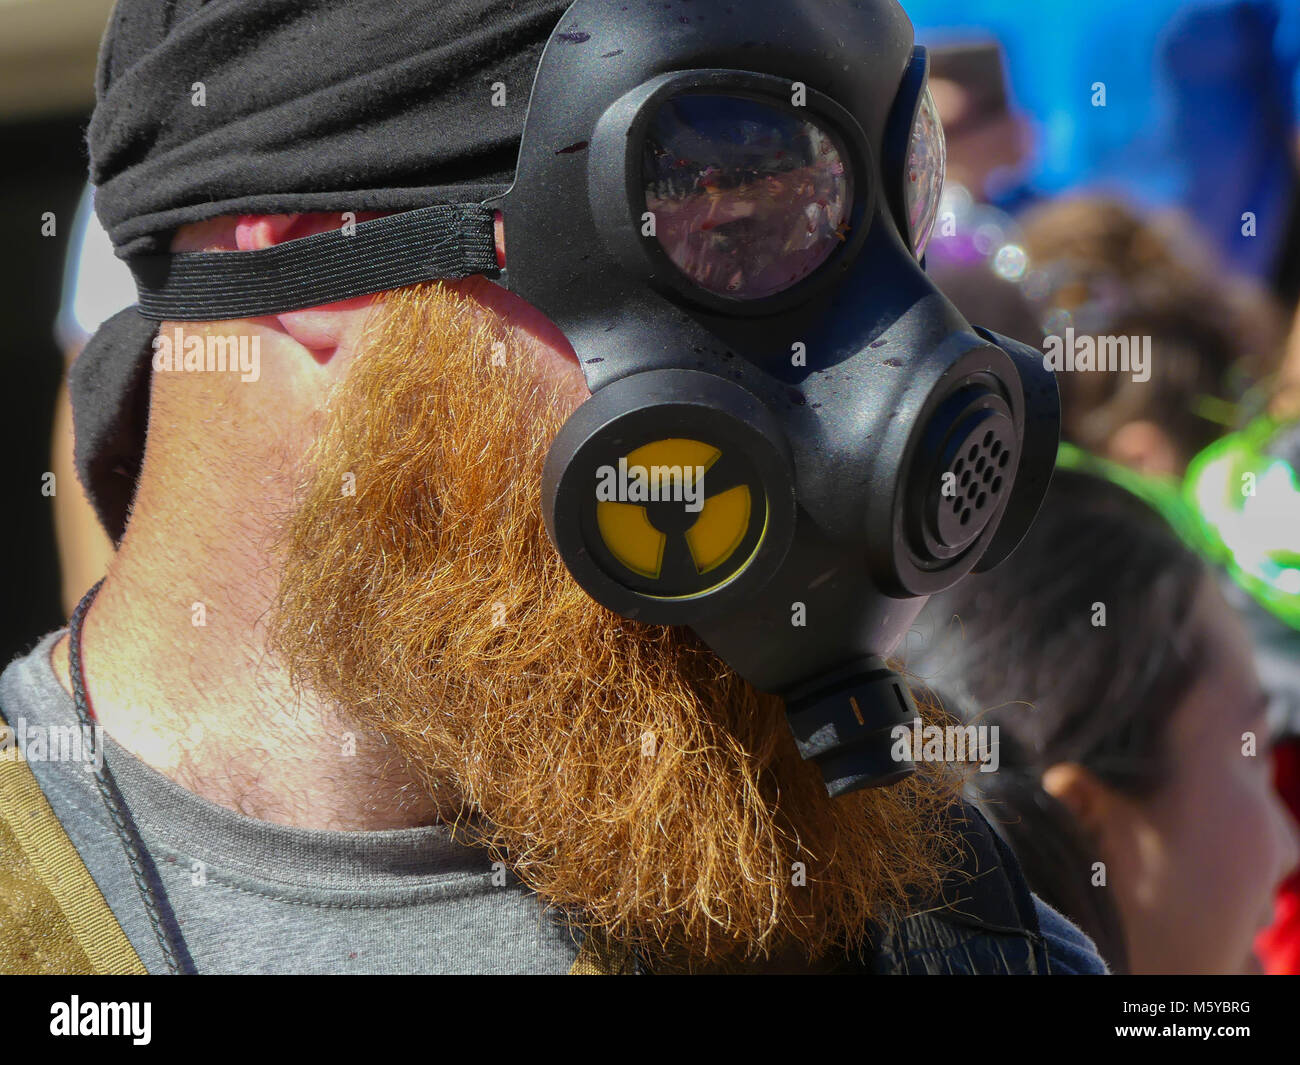 The makers of the Army's gas mask are looking into beard-friendly options